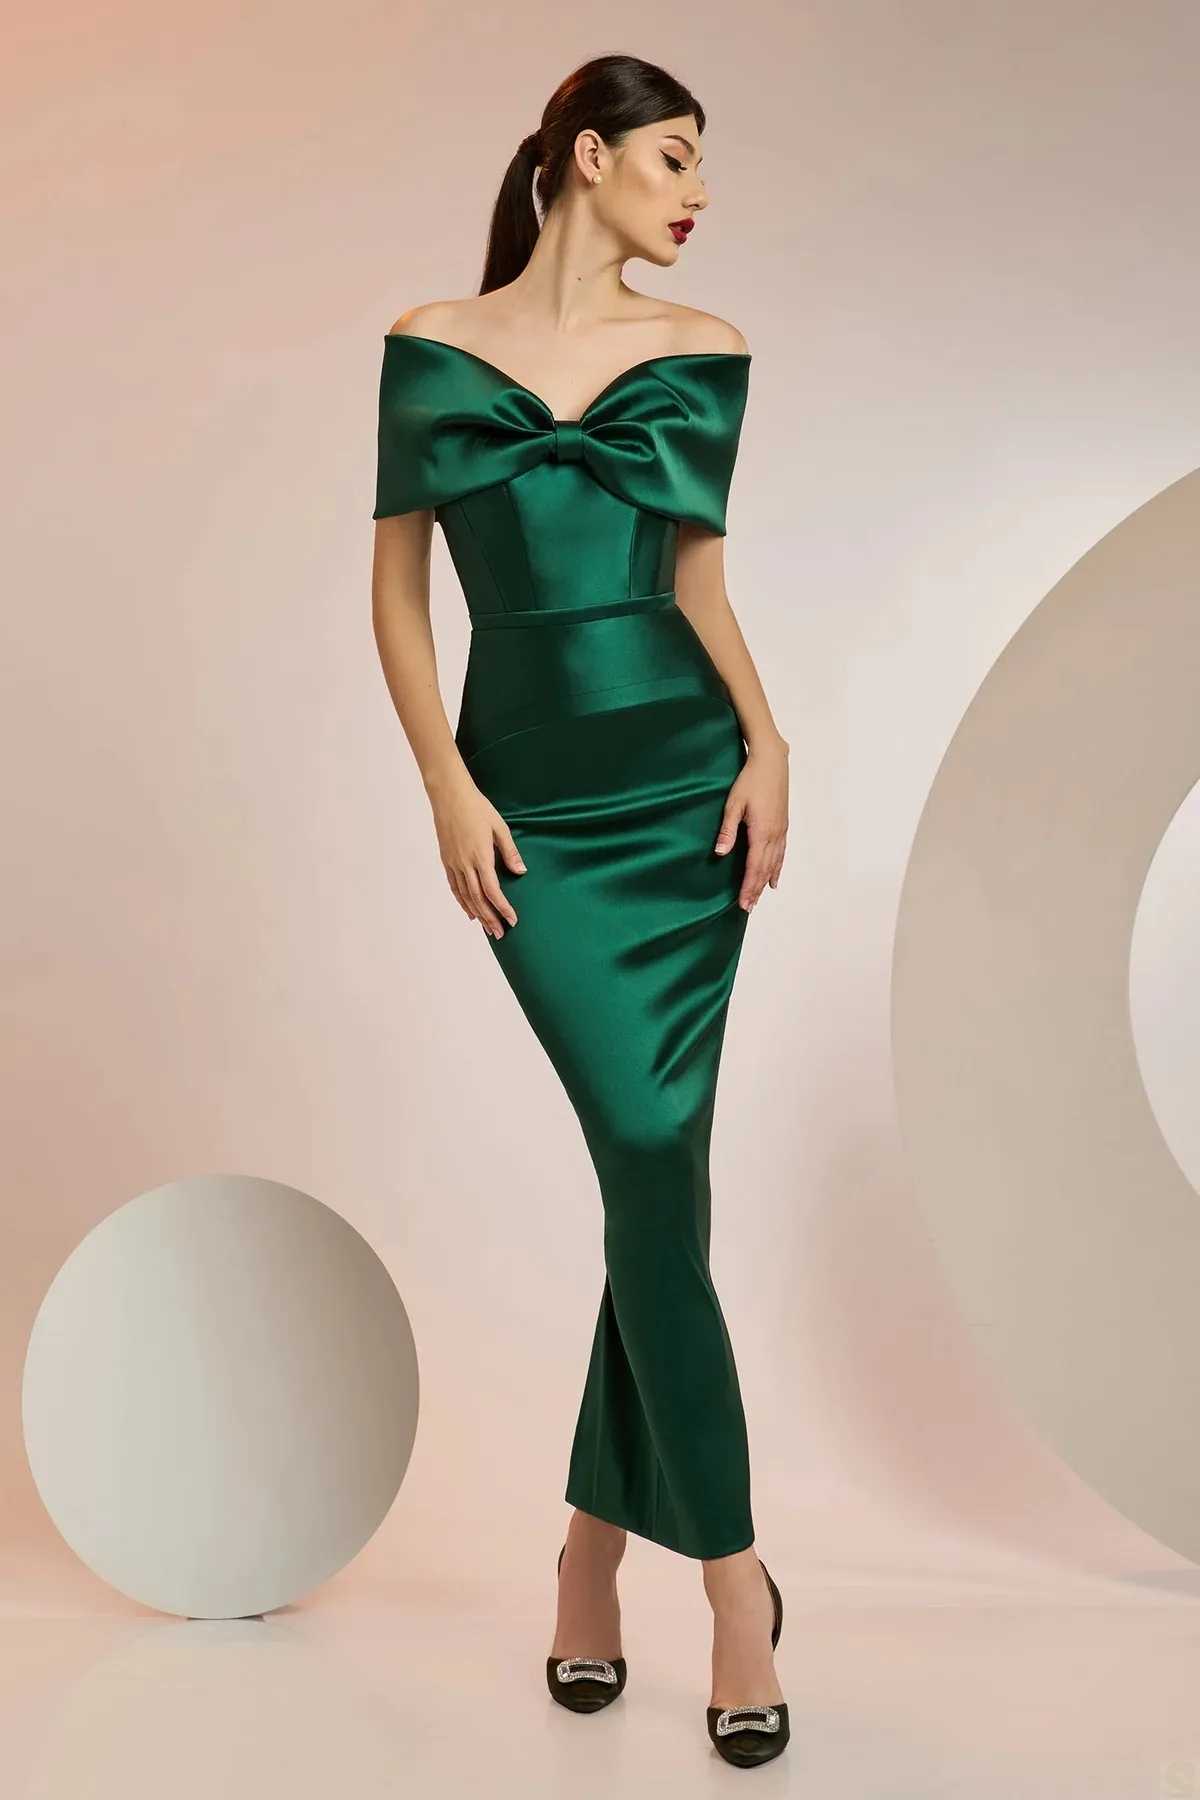 Glamorous Prom Dresses Mermaid Deep Satin Strapless with A Bow Off the Shoulder Solid Color Ankle Length Slim Backless Custom Made Zipper Evening Dress Plus Size